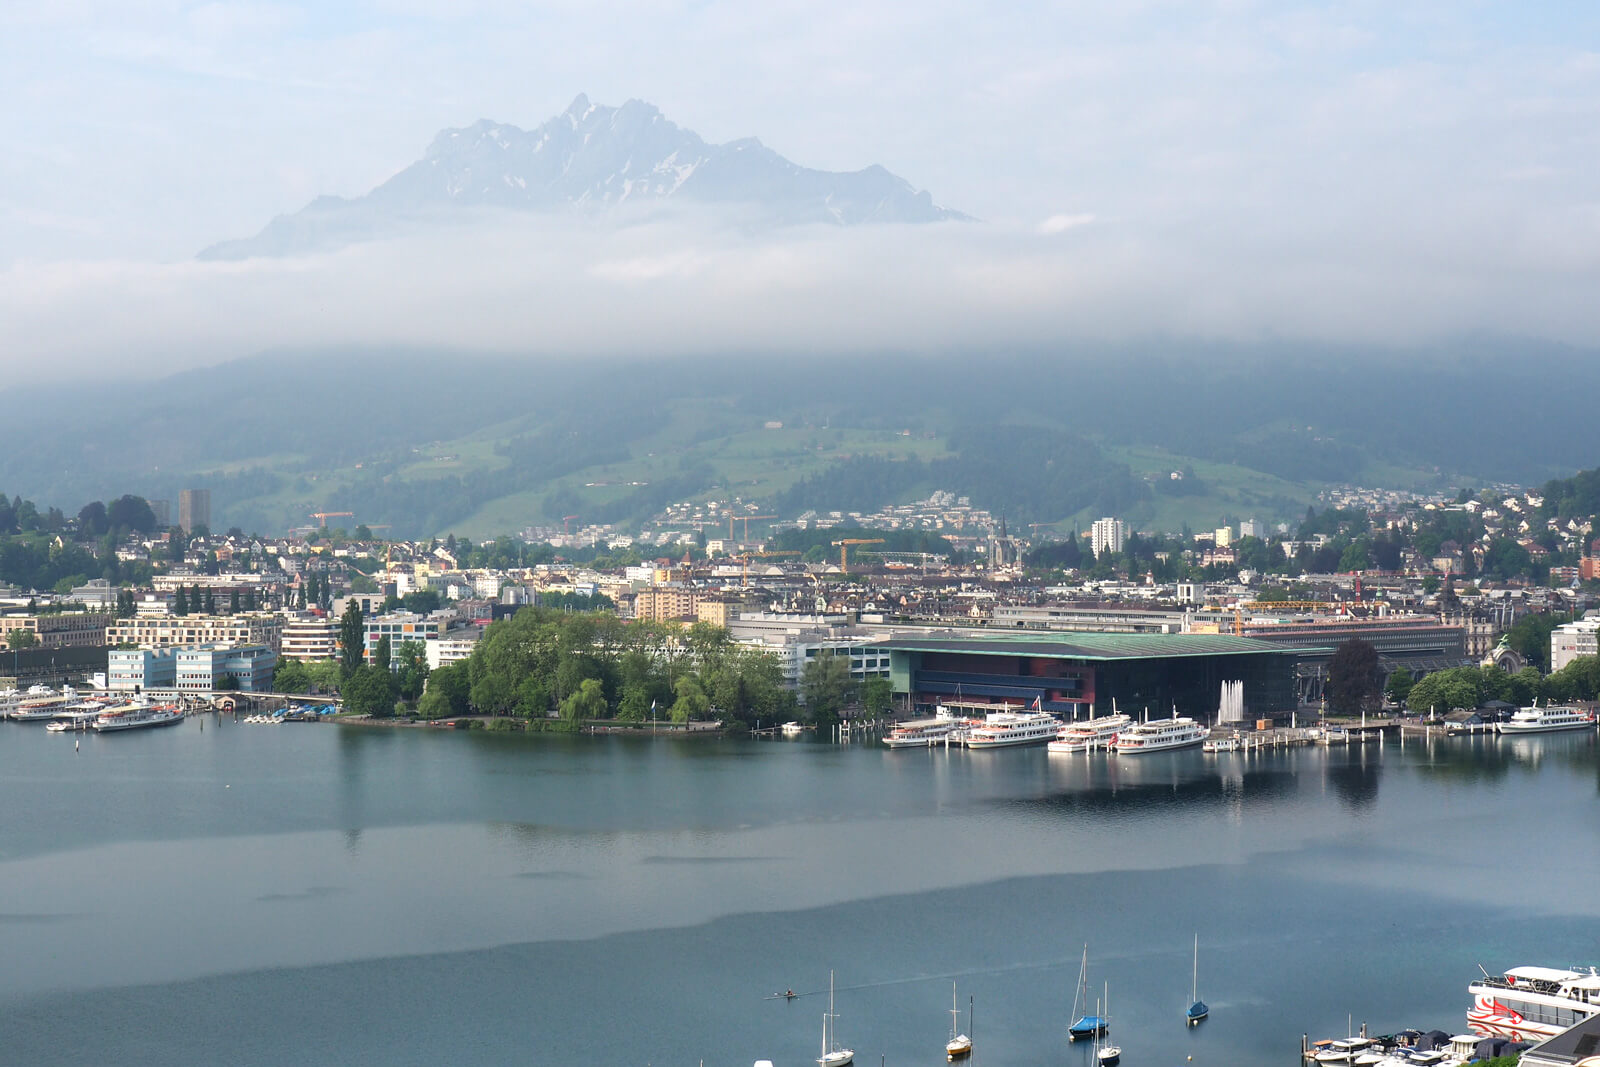 View of Lake Lucerne and Mt. Pilatus with KKL Convention Center in Lucerne, Switzerland